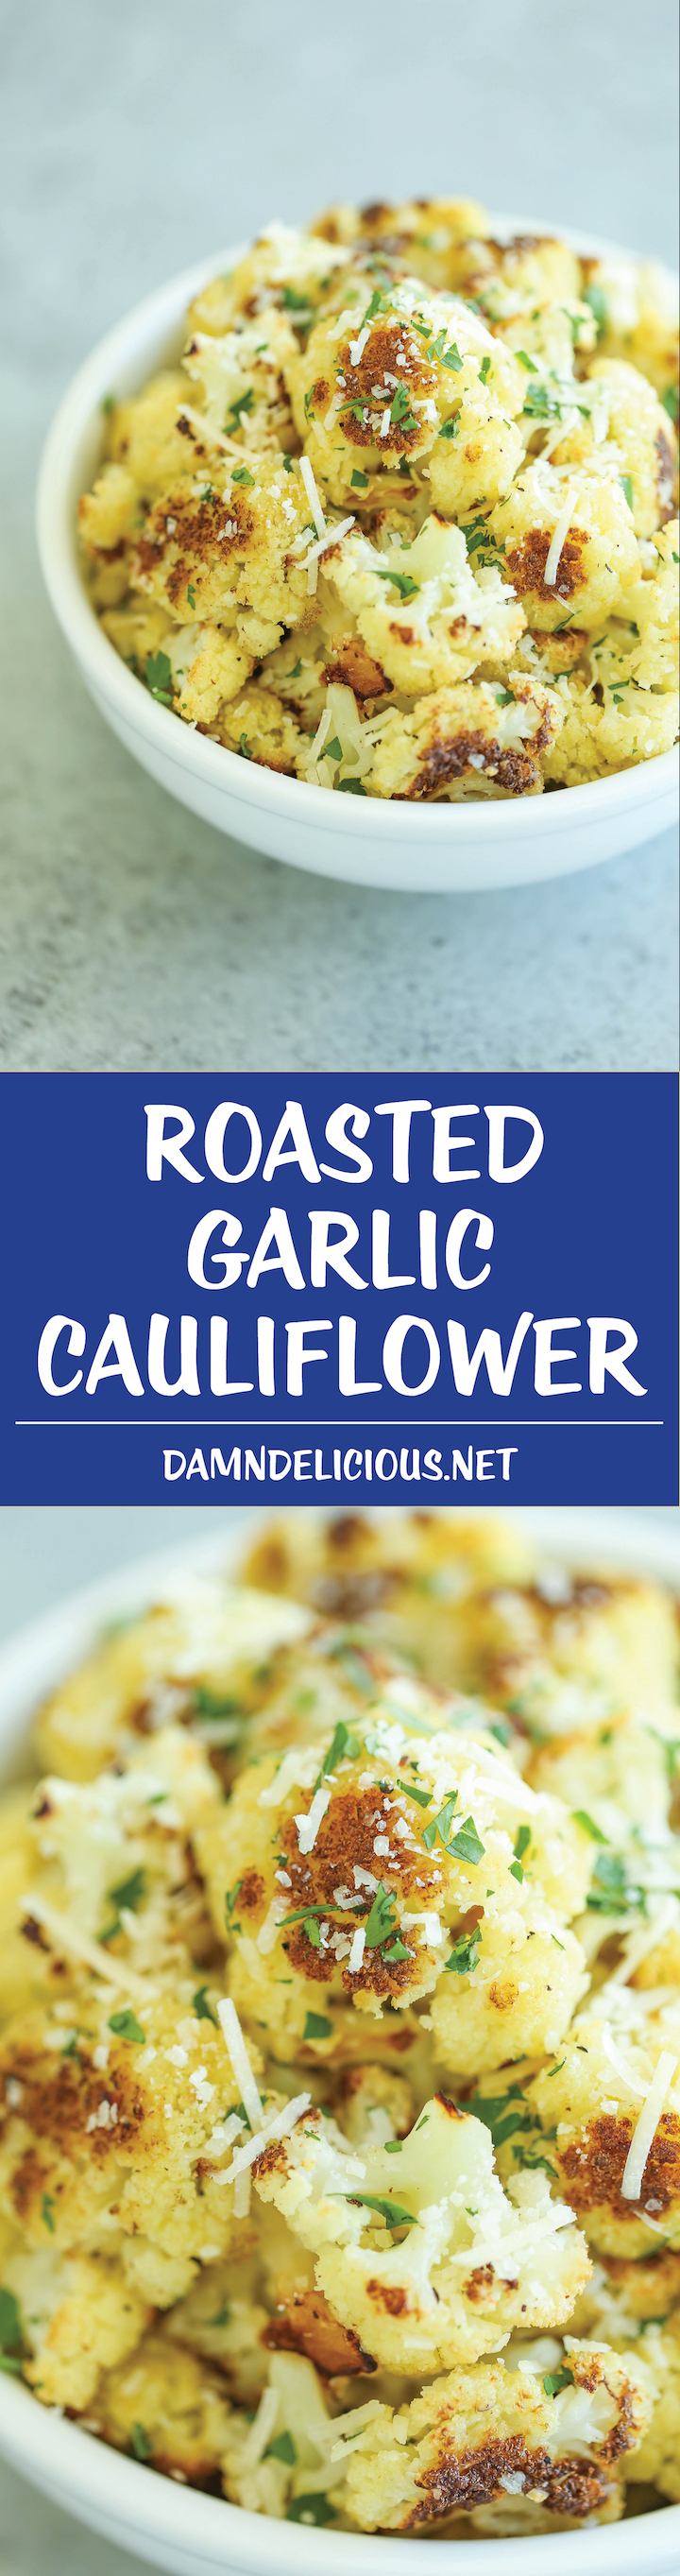 Roasted Garlic Cauliflower - A super simple and fast side dish to accompany any meal. Even the pickiest of eaters will be begging for seconds and thirds!